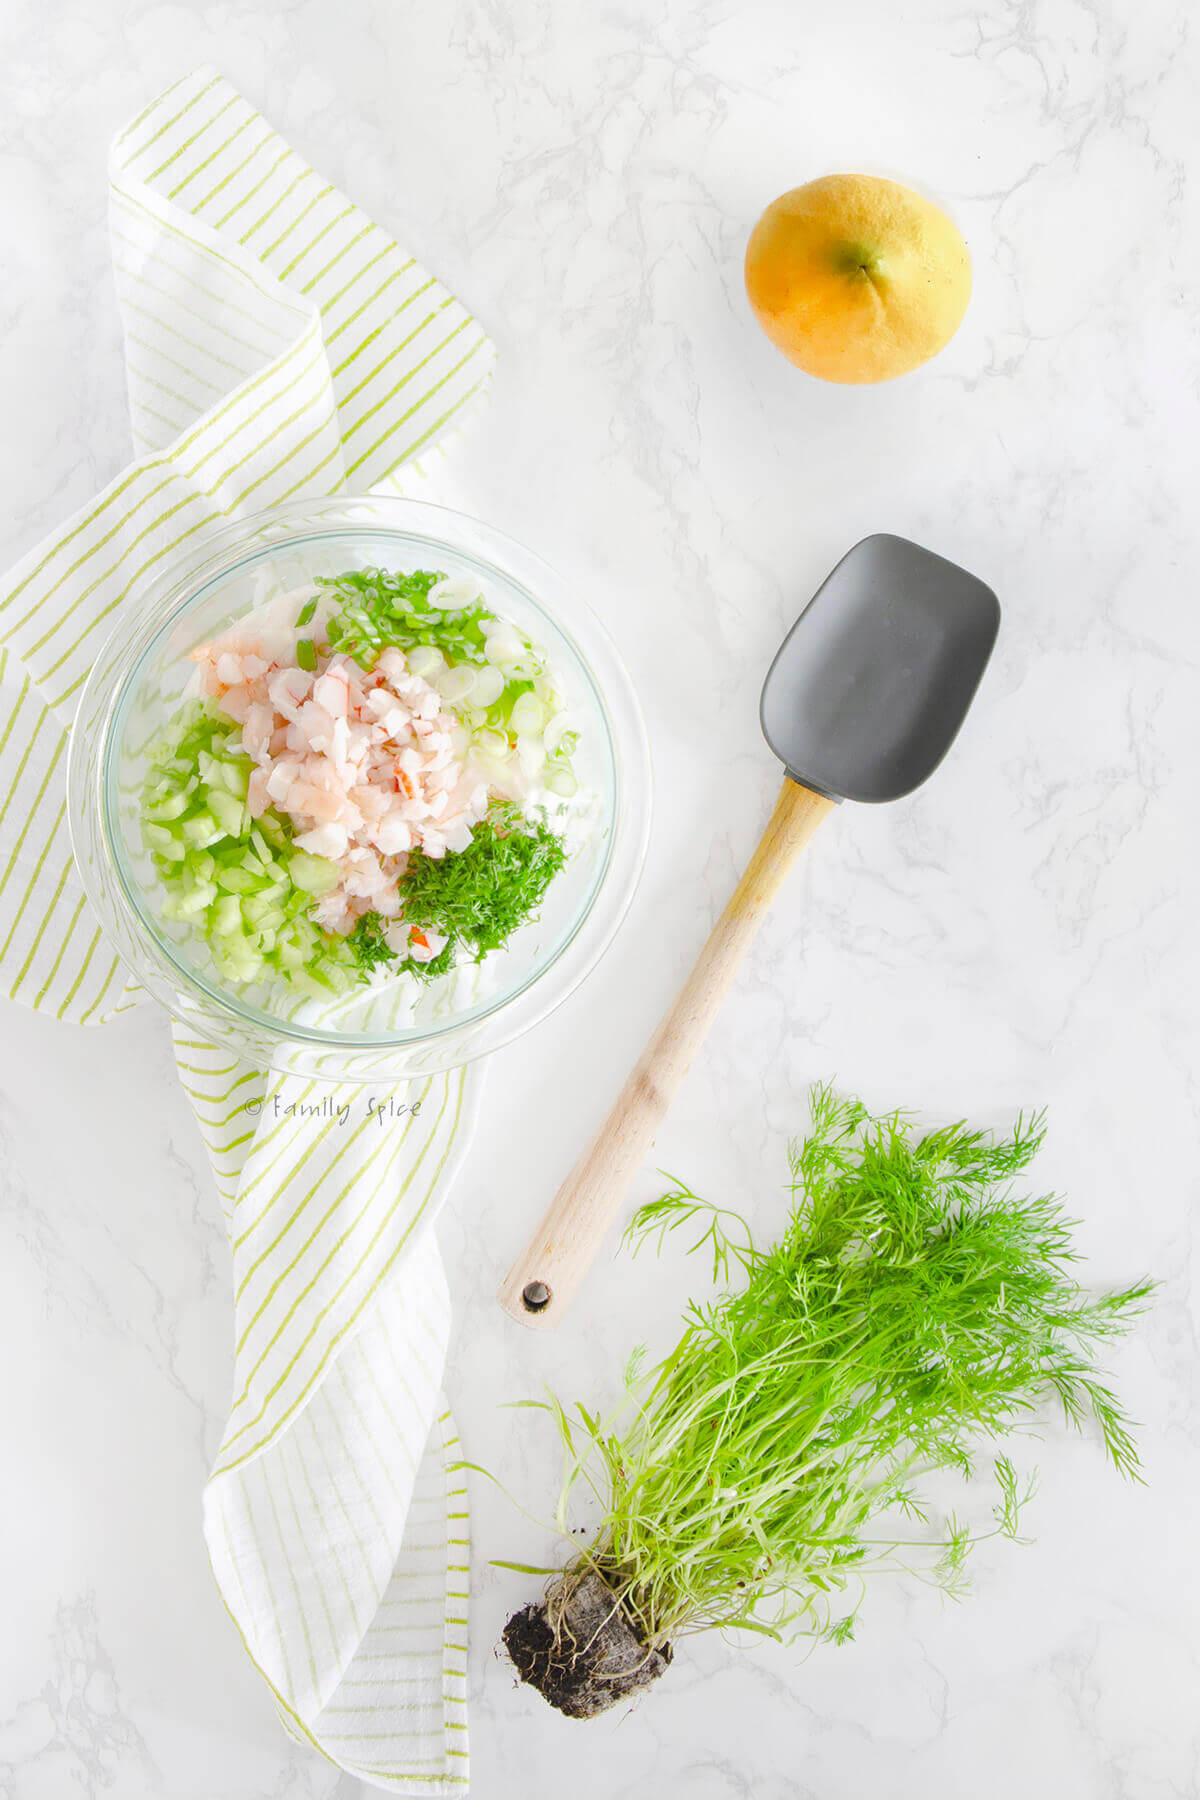 Ingredients to make shrimp and crab dip in a glass bowl with a lemon, dill plant and rubber spatula next to it